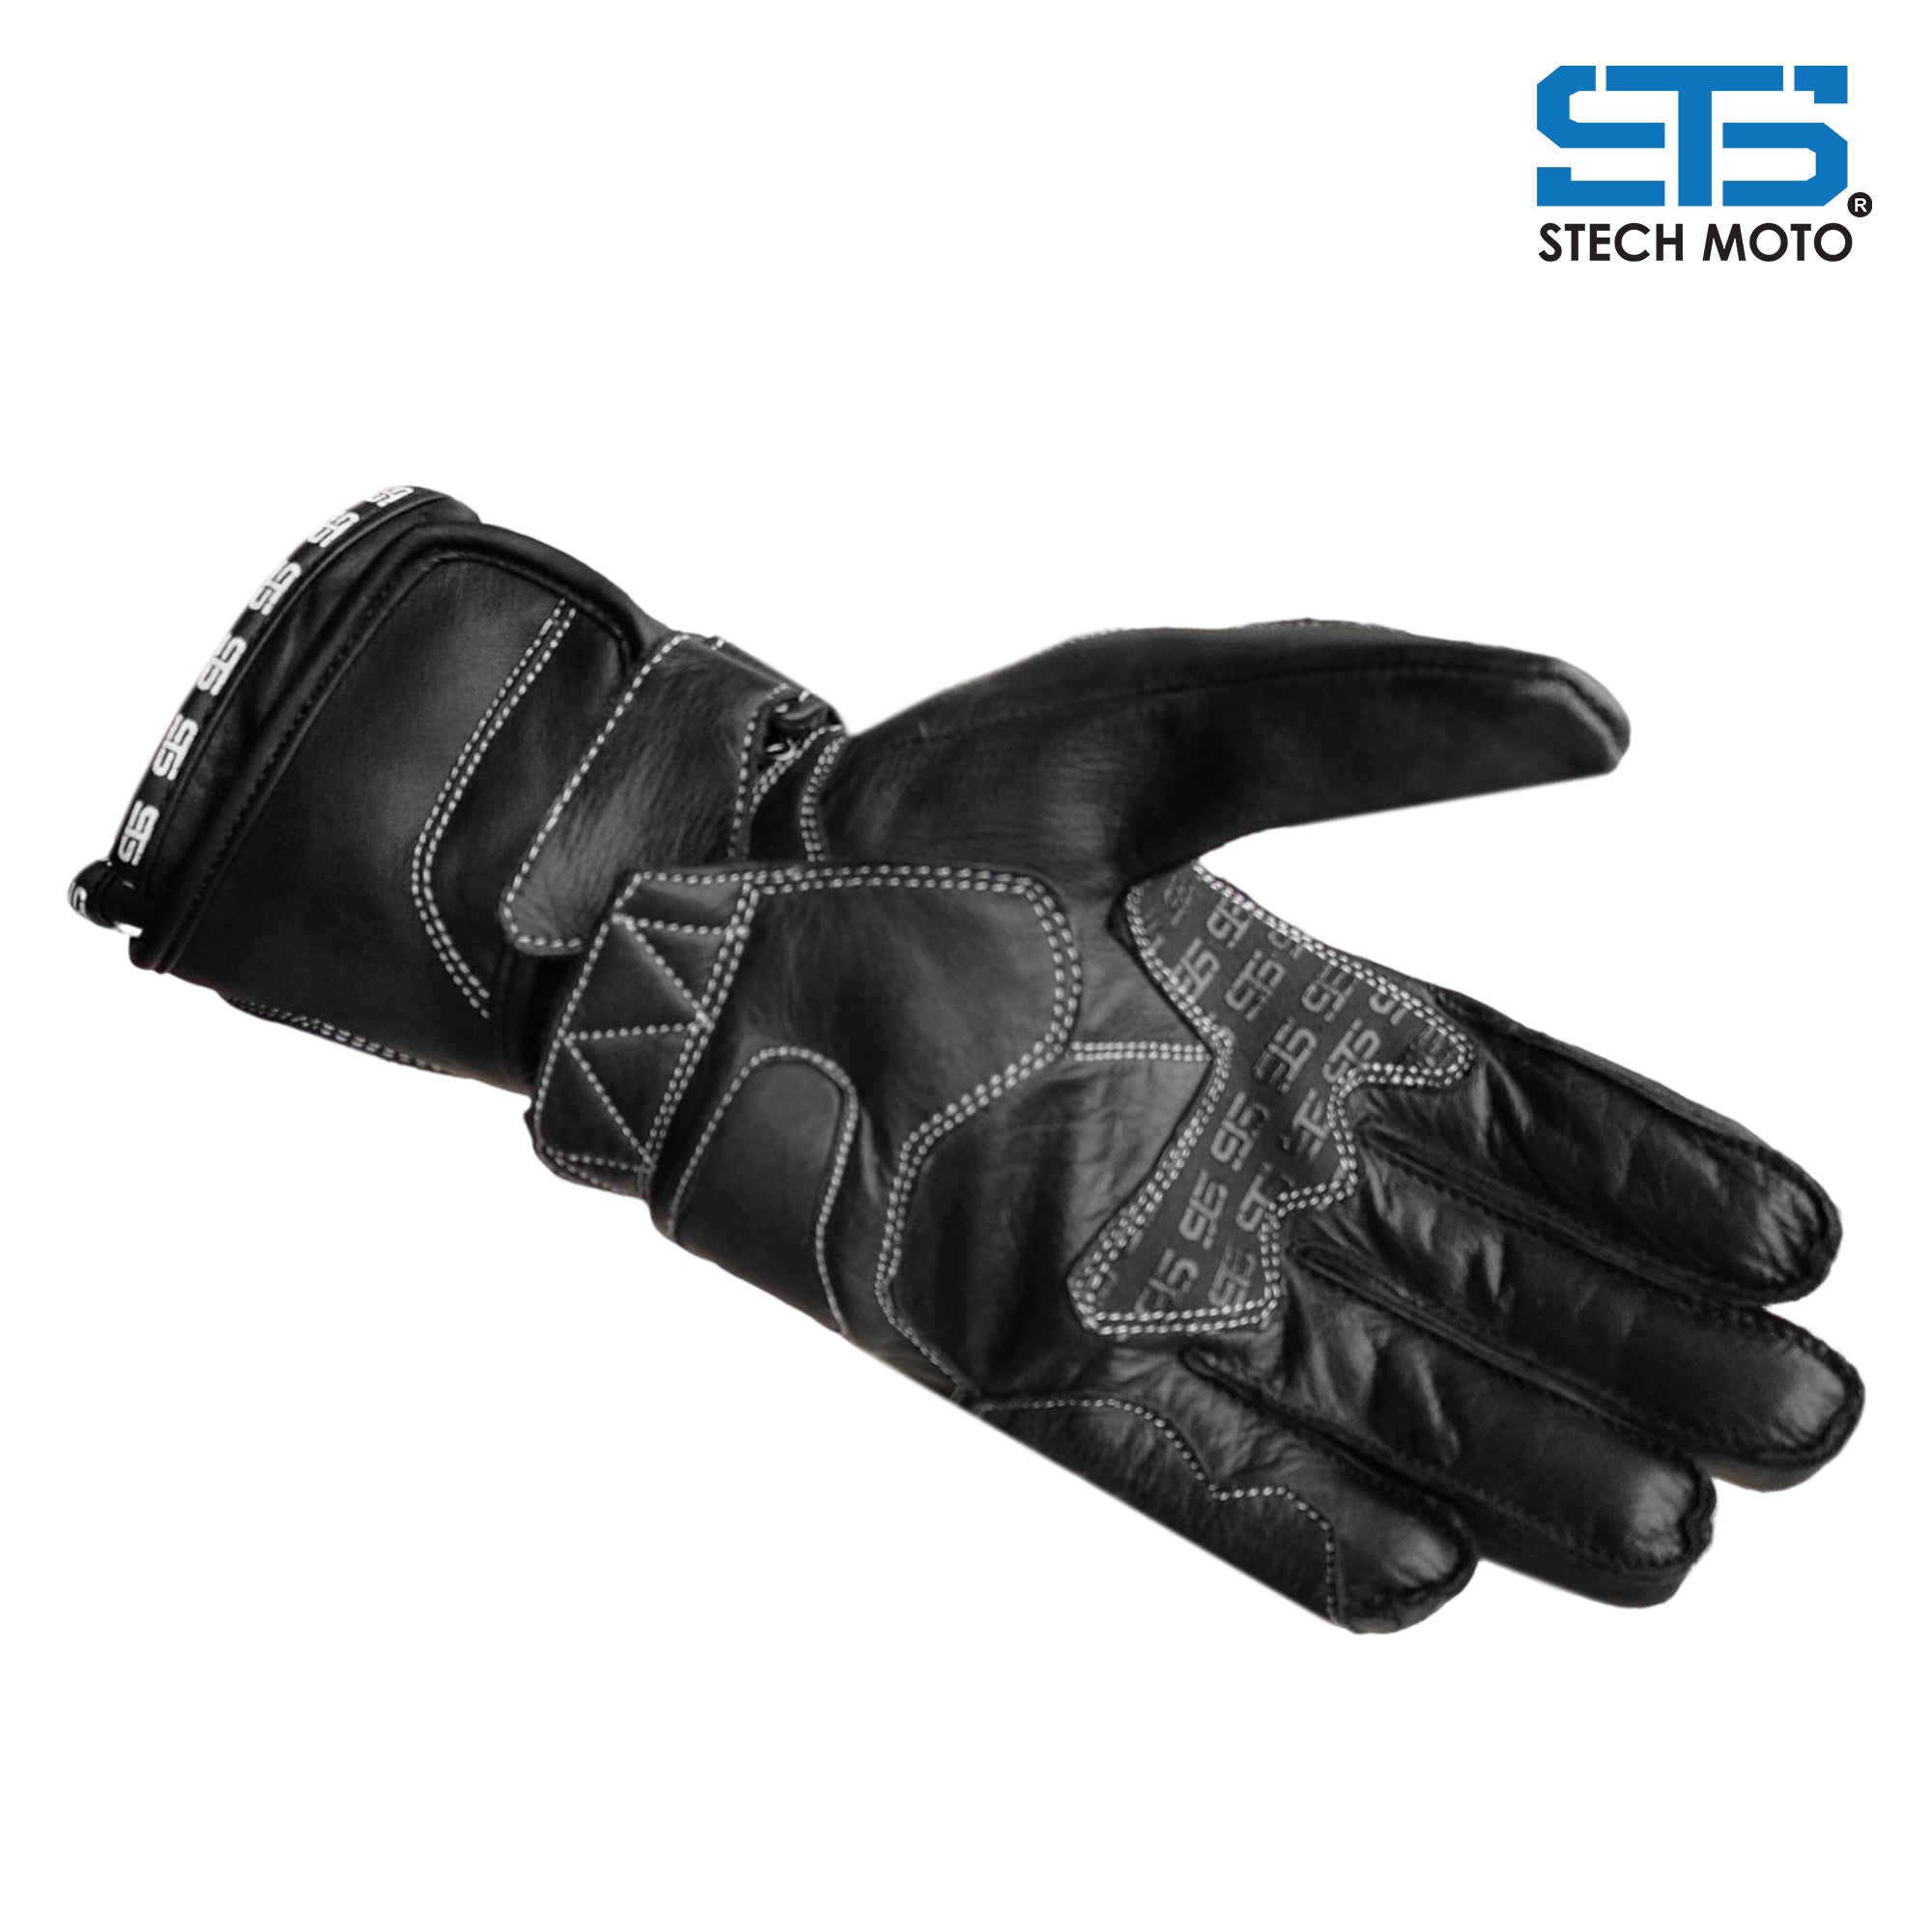 Motorcycle Leather Gloves Stechmoto ST 1830 DKH Touring and urban, off-road white-black